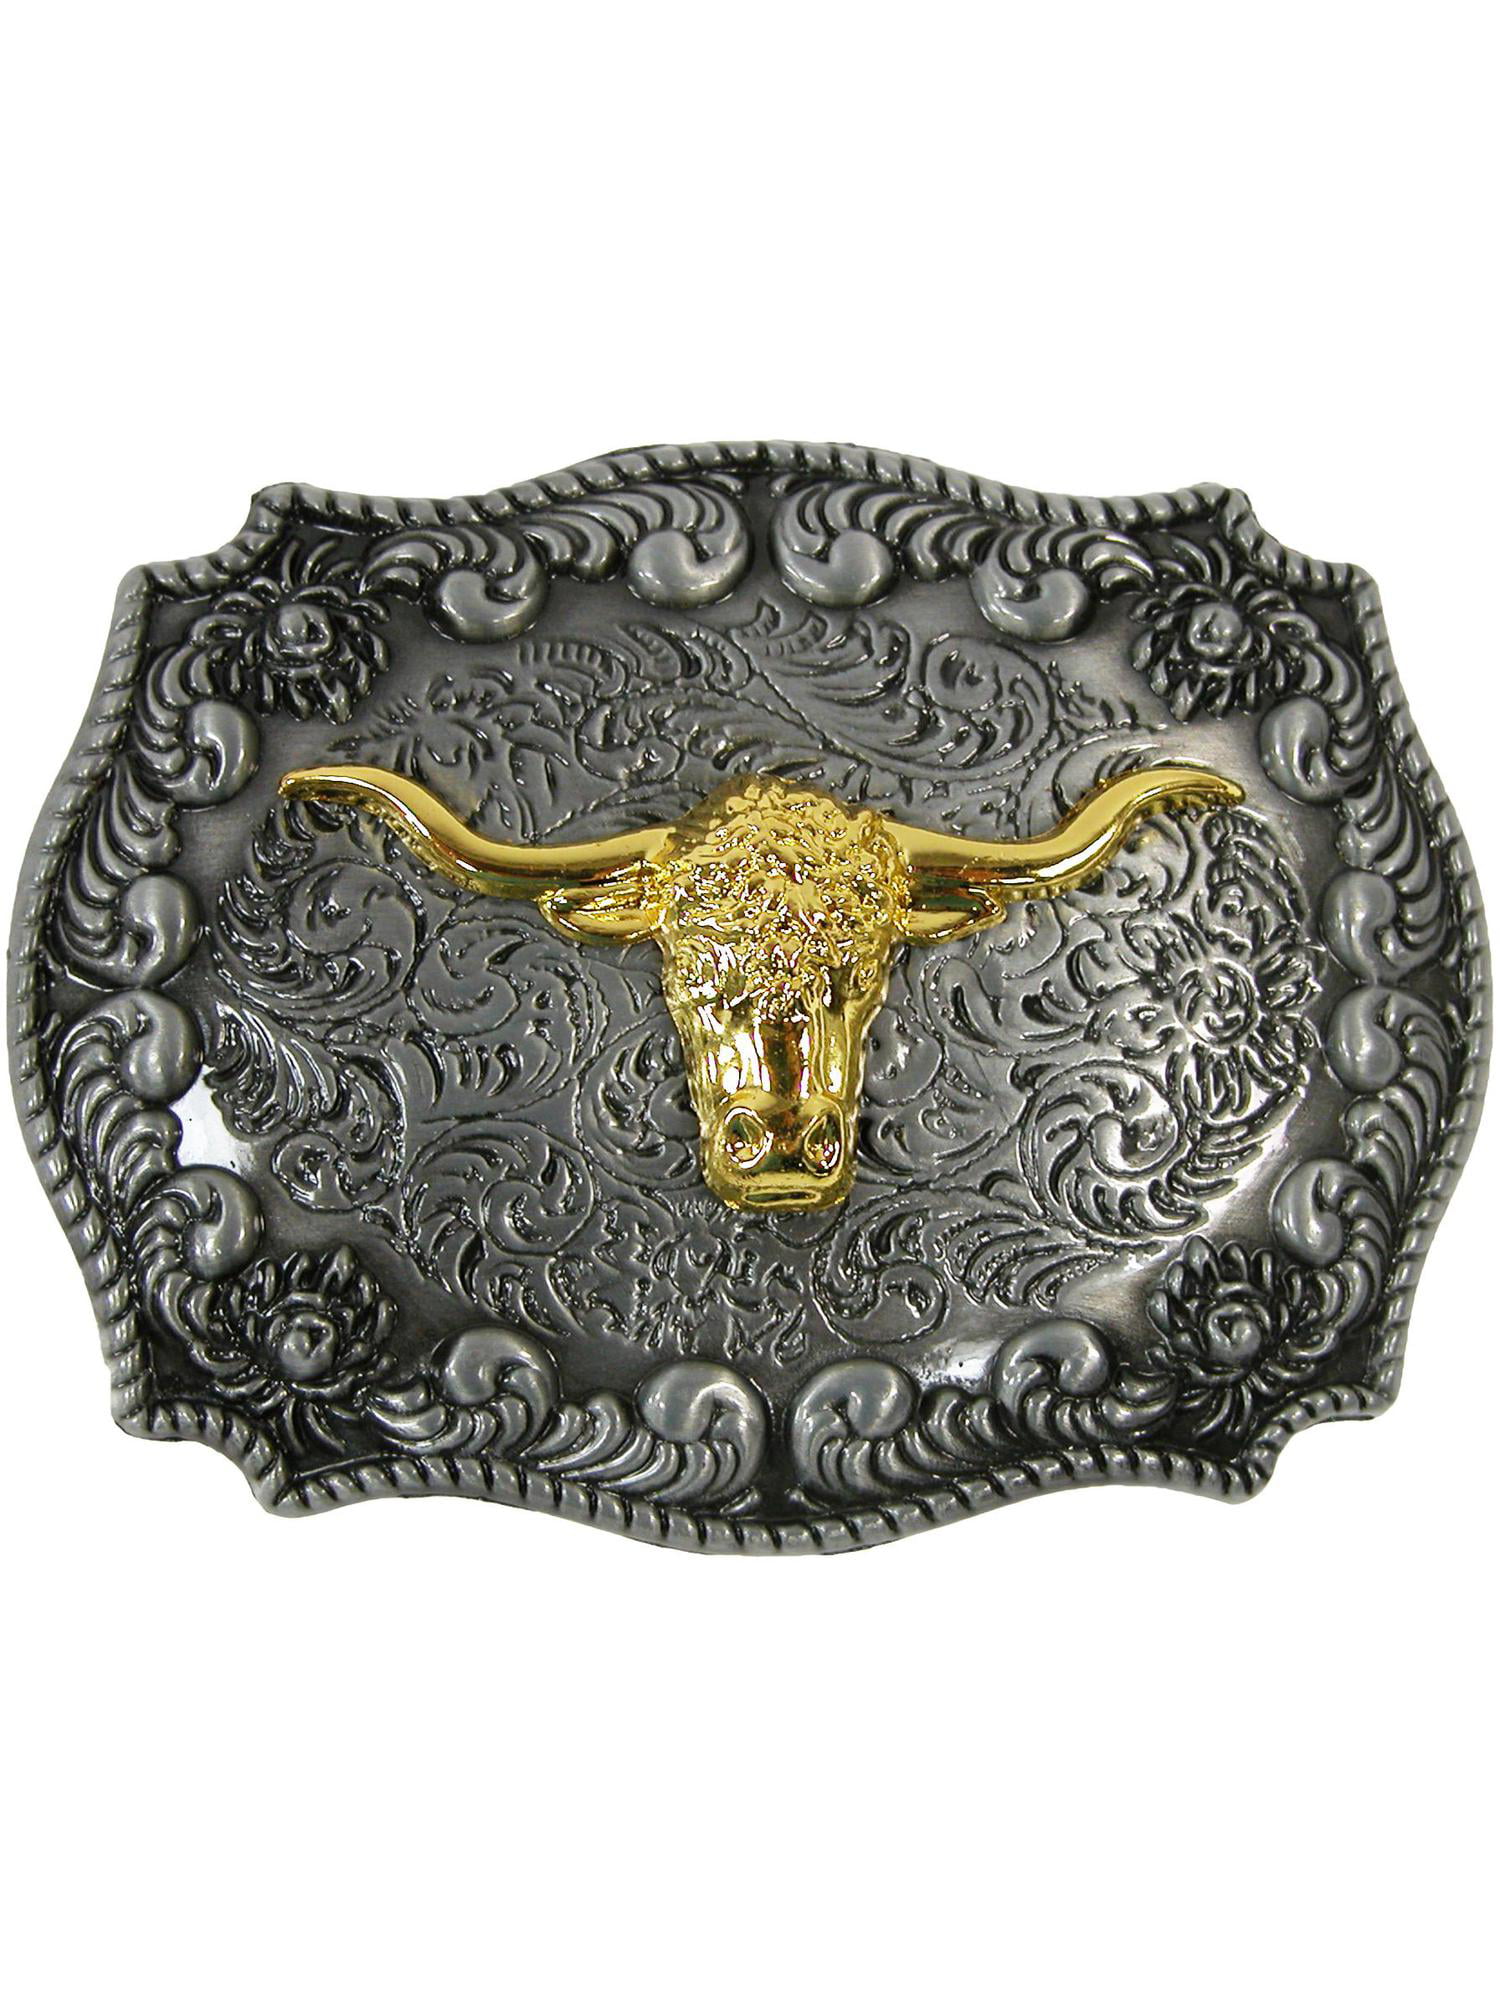 New Old Stock Gold Tone Western Cowboy Belt Buckle Made In USA 